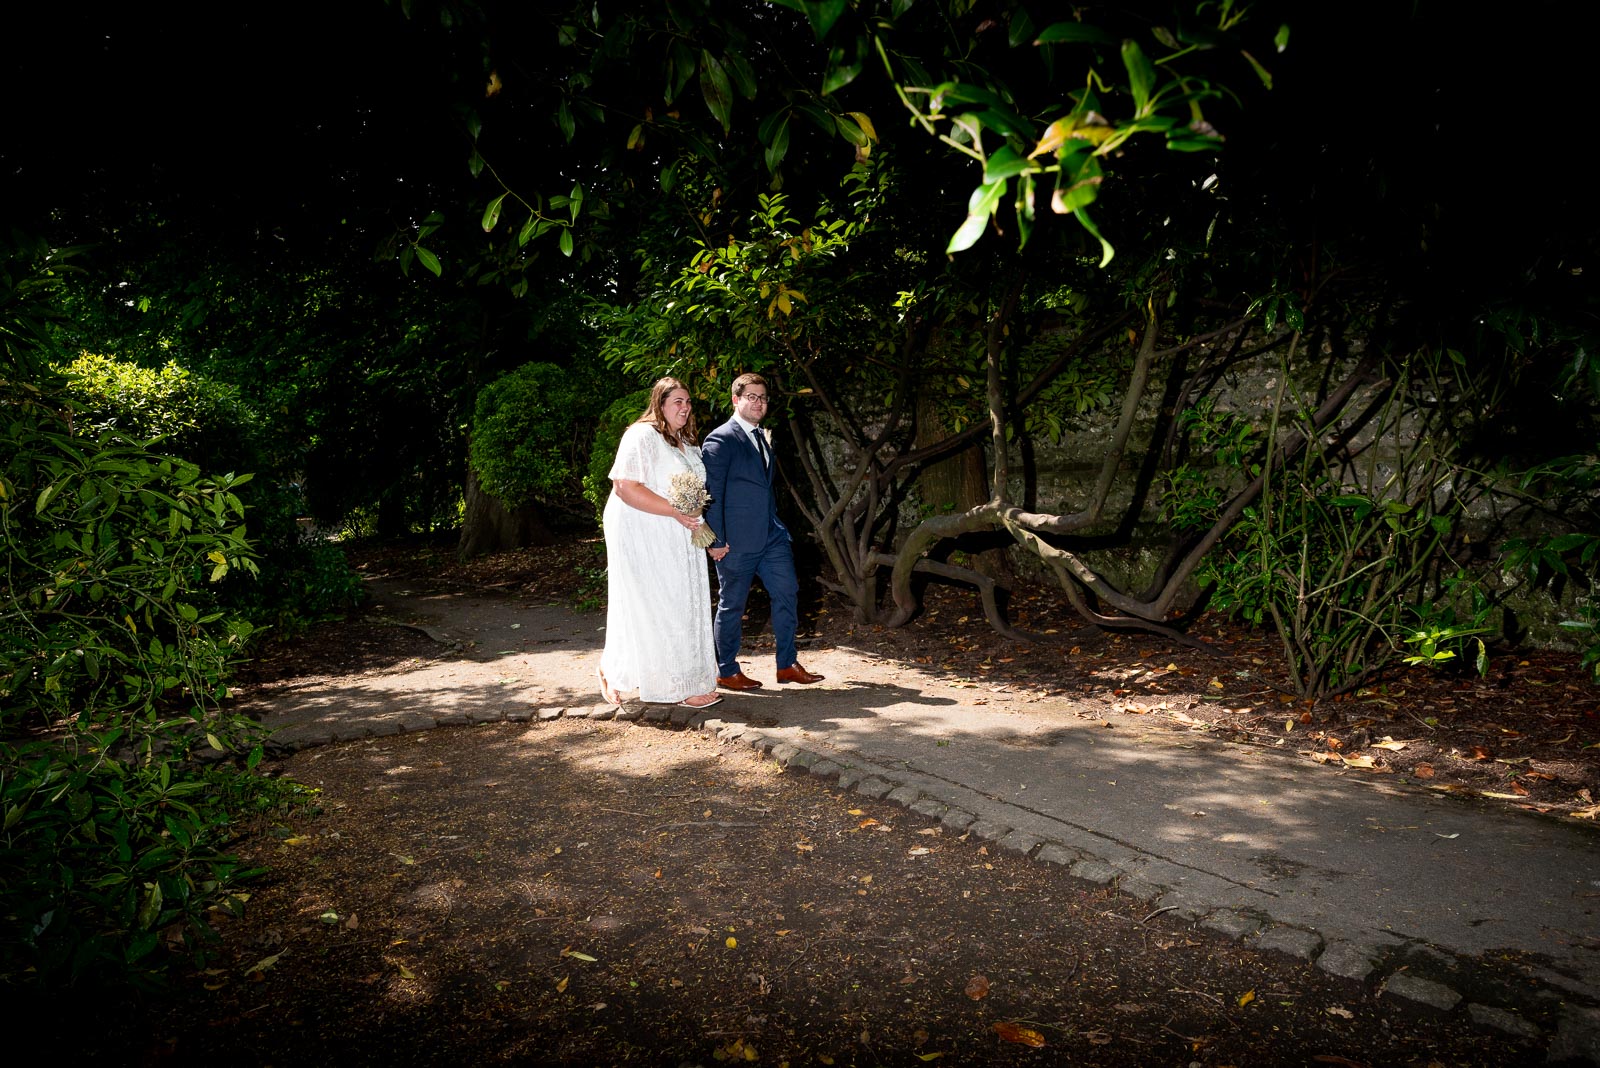 Sophie and Nathan walk through Southover Grange after their wedding in Lewes Register Office.